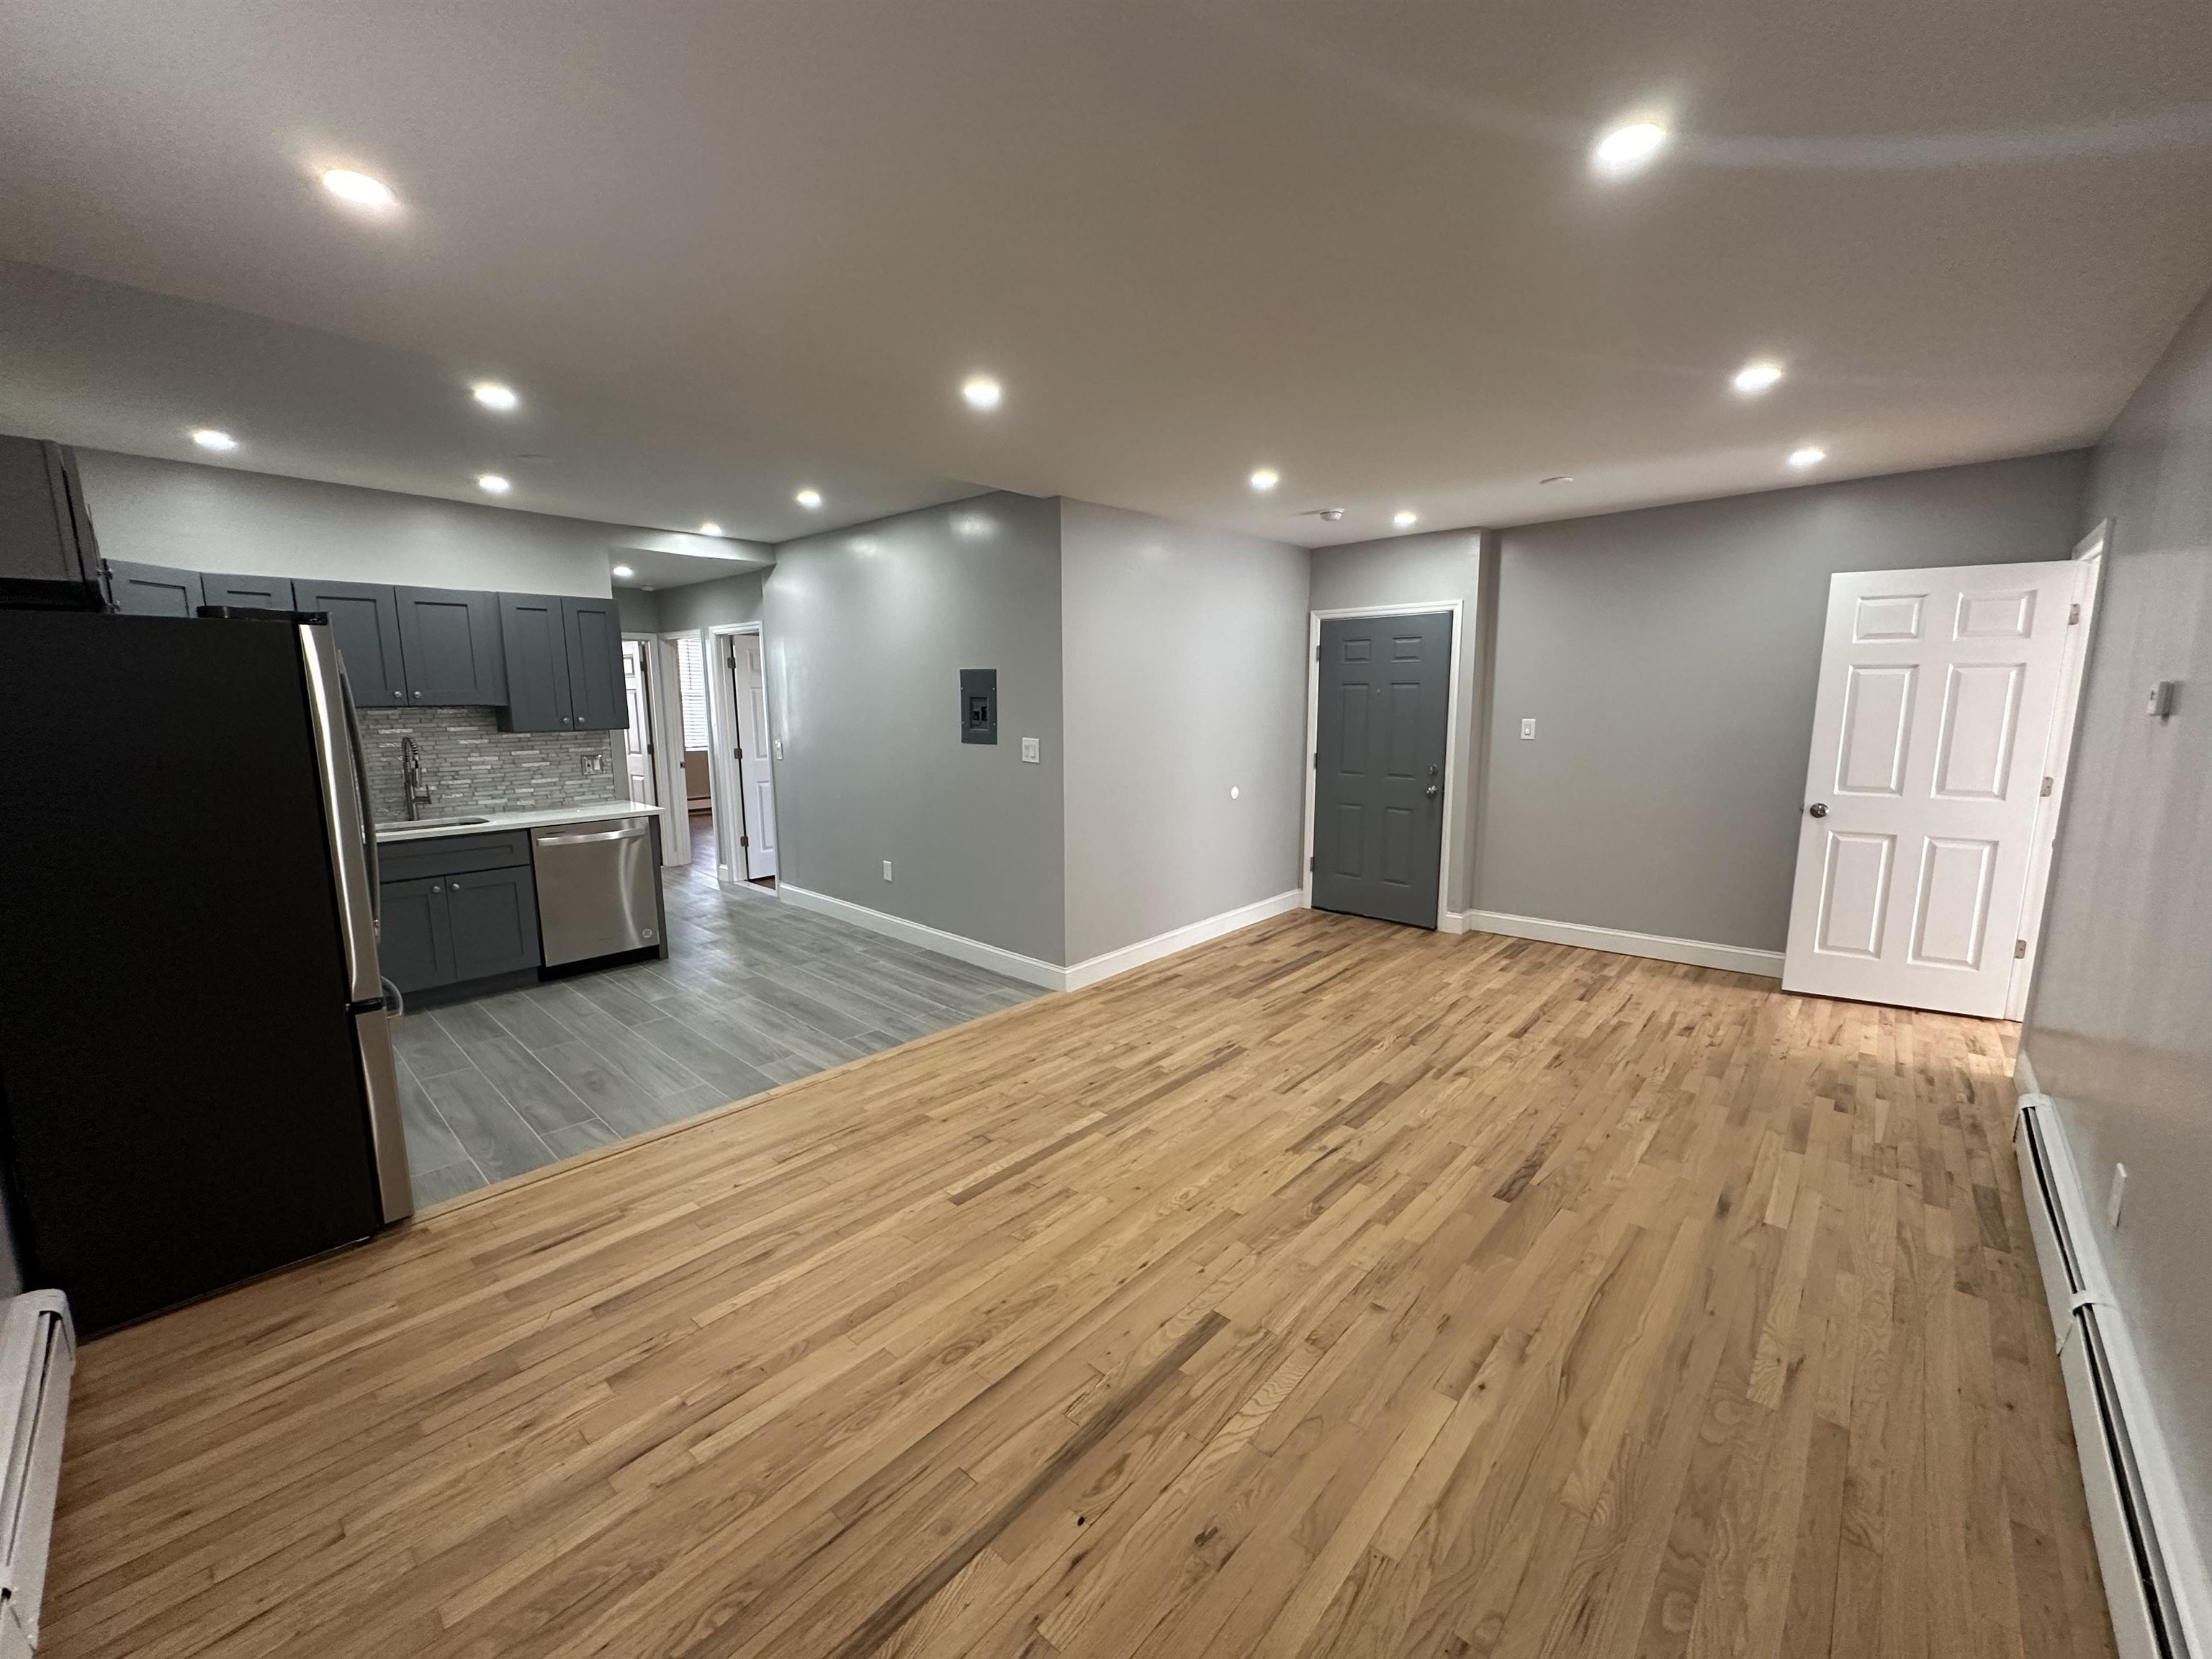 # 240004467 - For Rent in Union City NJ